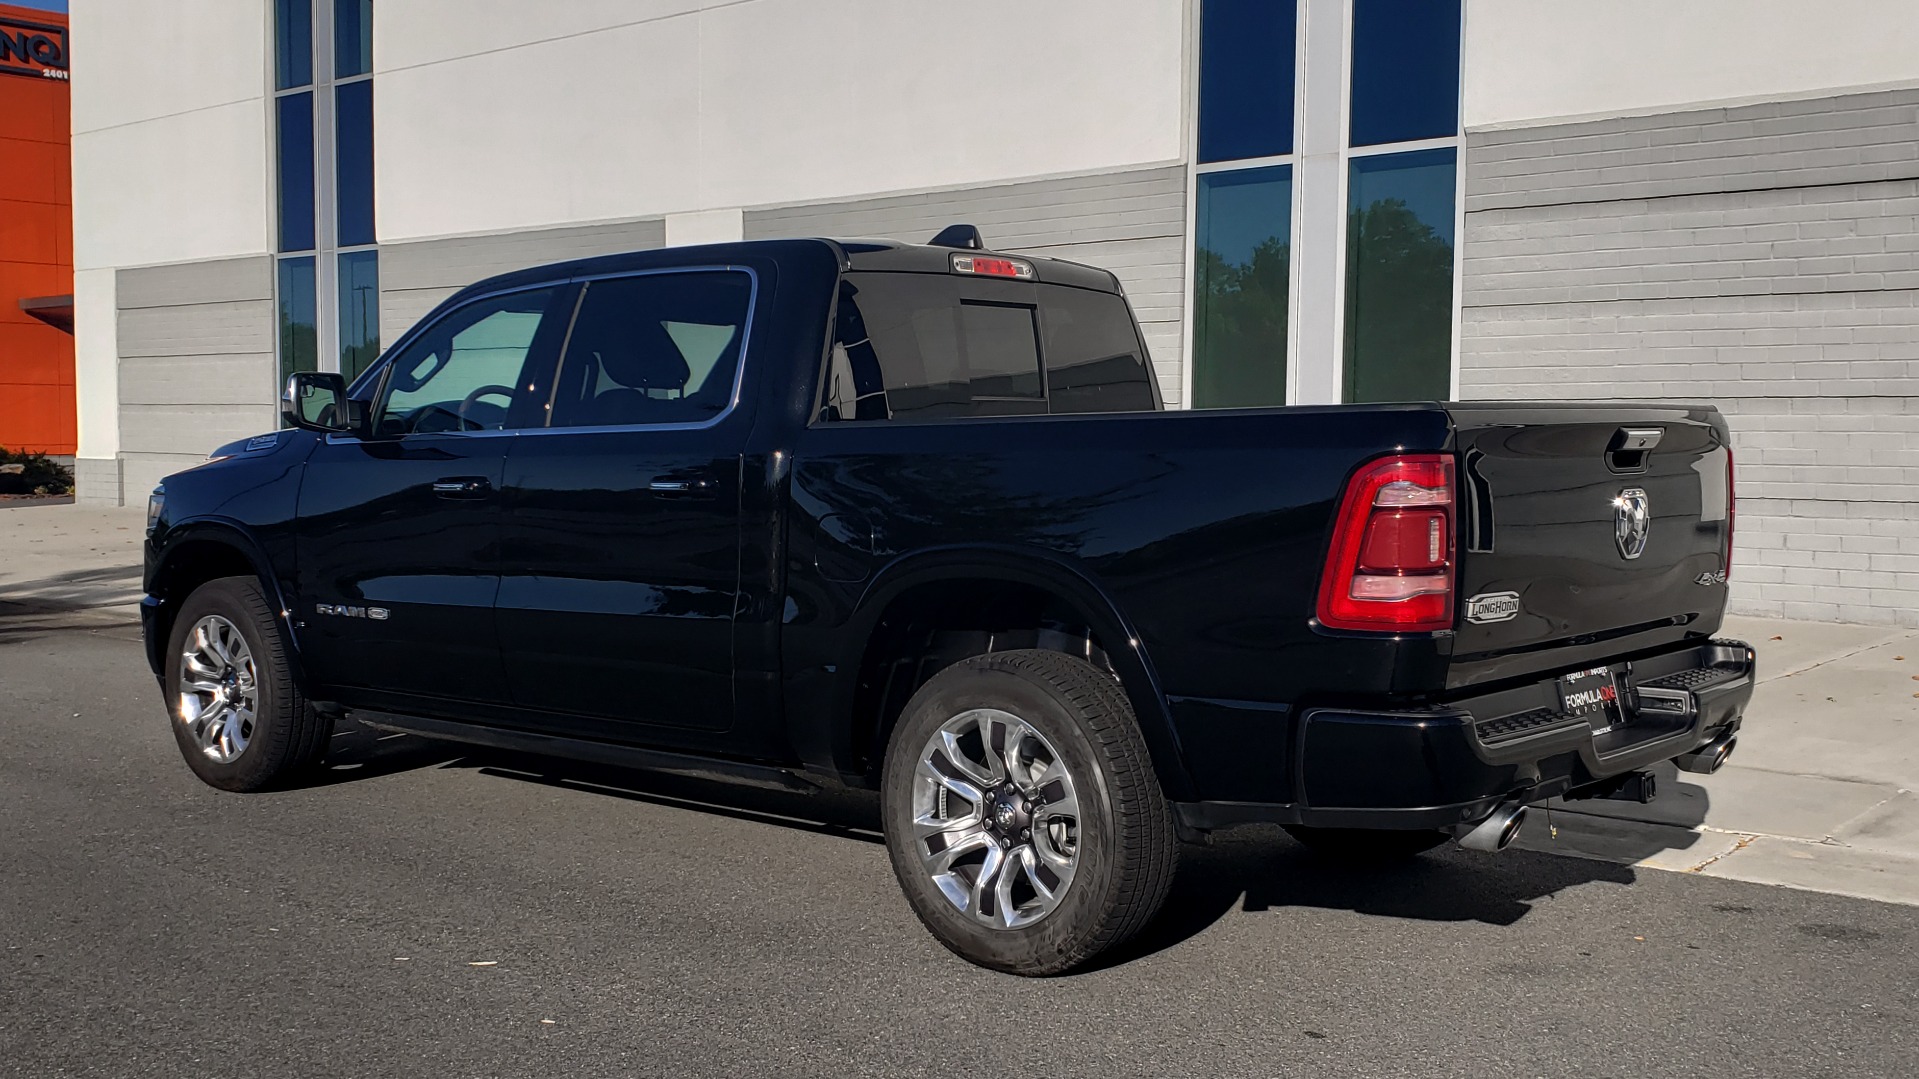 Used 2021 Ram 1500 LONGHORN LIMITED 4X4 / 5.7L HEMI / CREWCAB / H/K SND / PANO-ROOF / REARVIEW for sale Sold at Formula Imports in Charlotte NC 28227 5